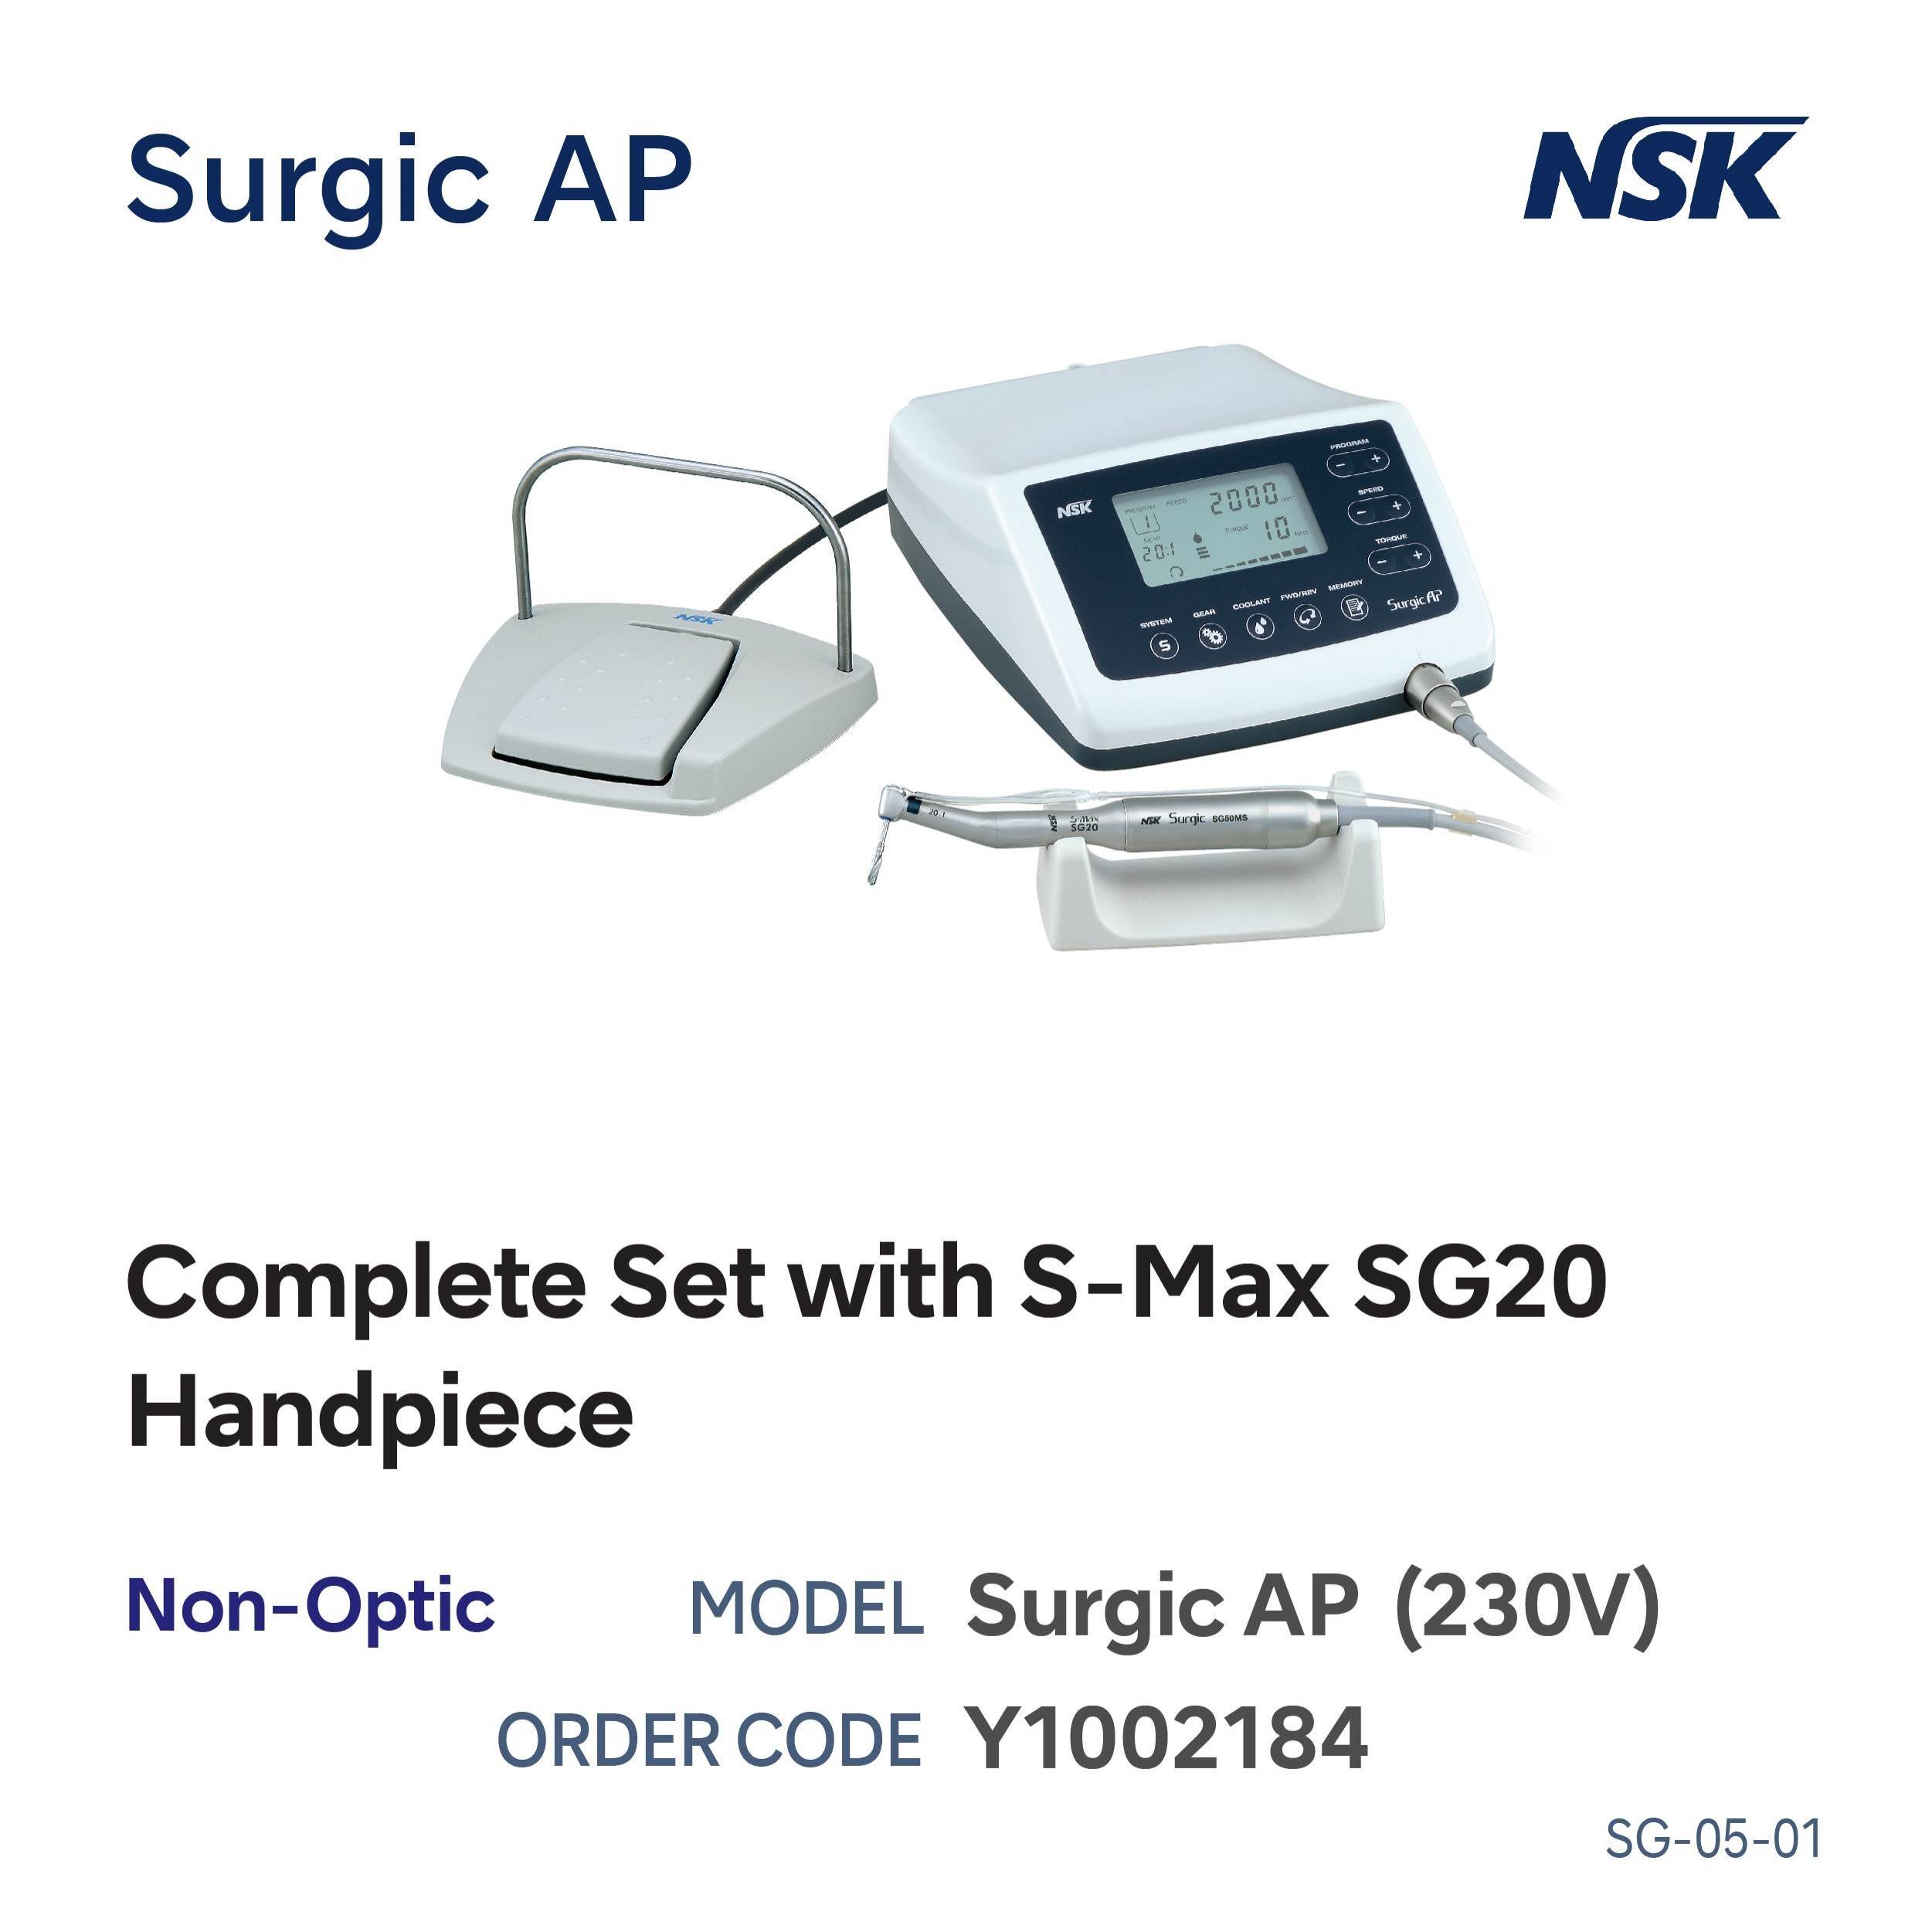 Surgic Ap With S Max SG20 Handpiece